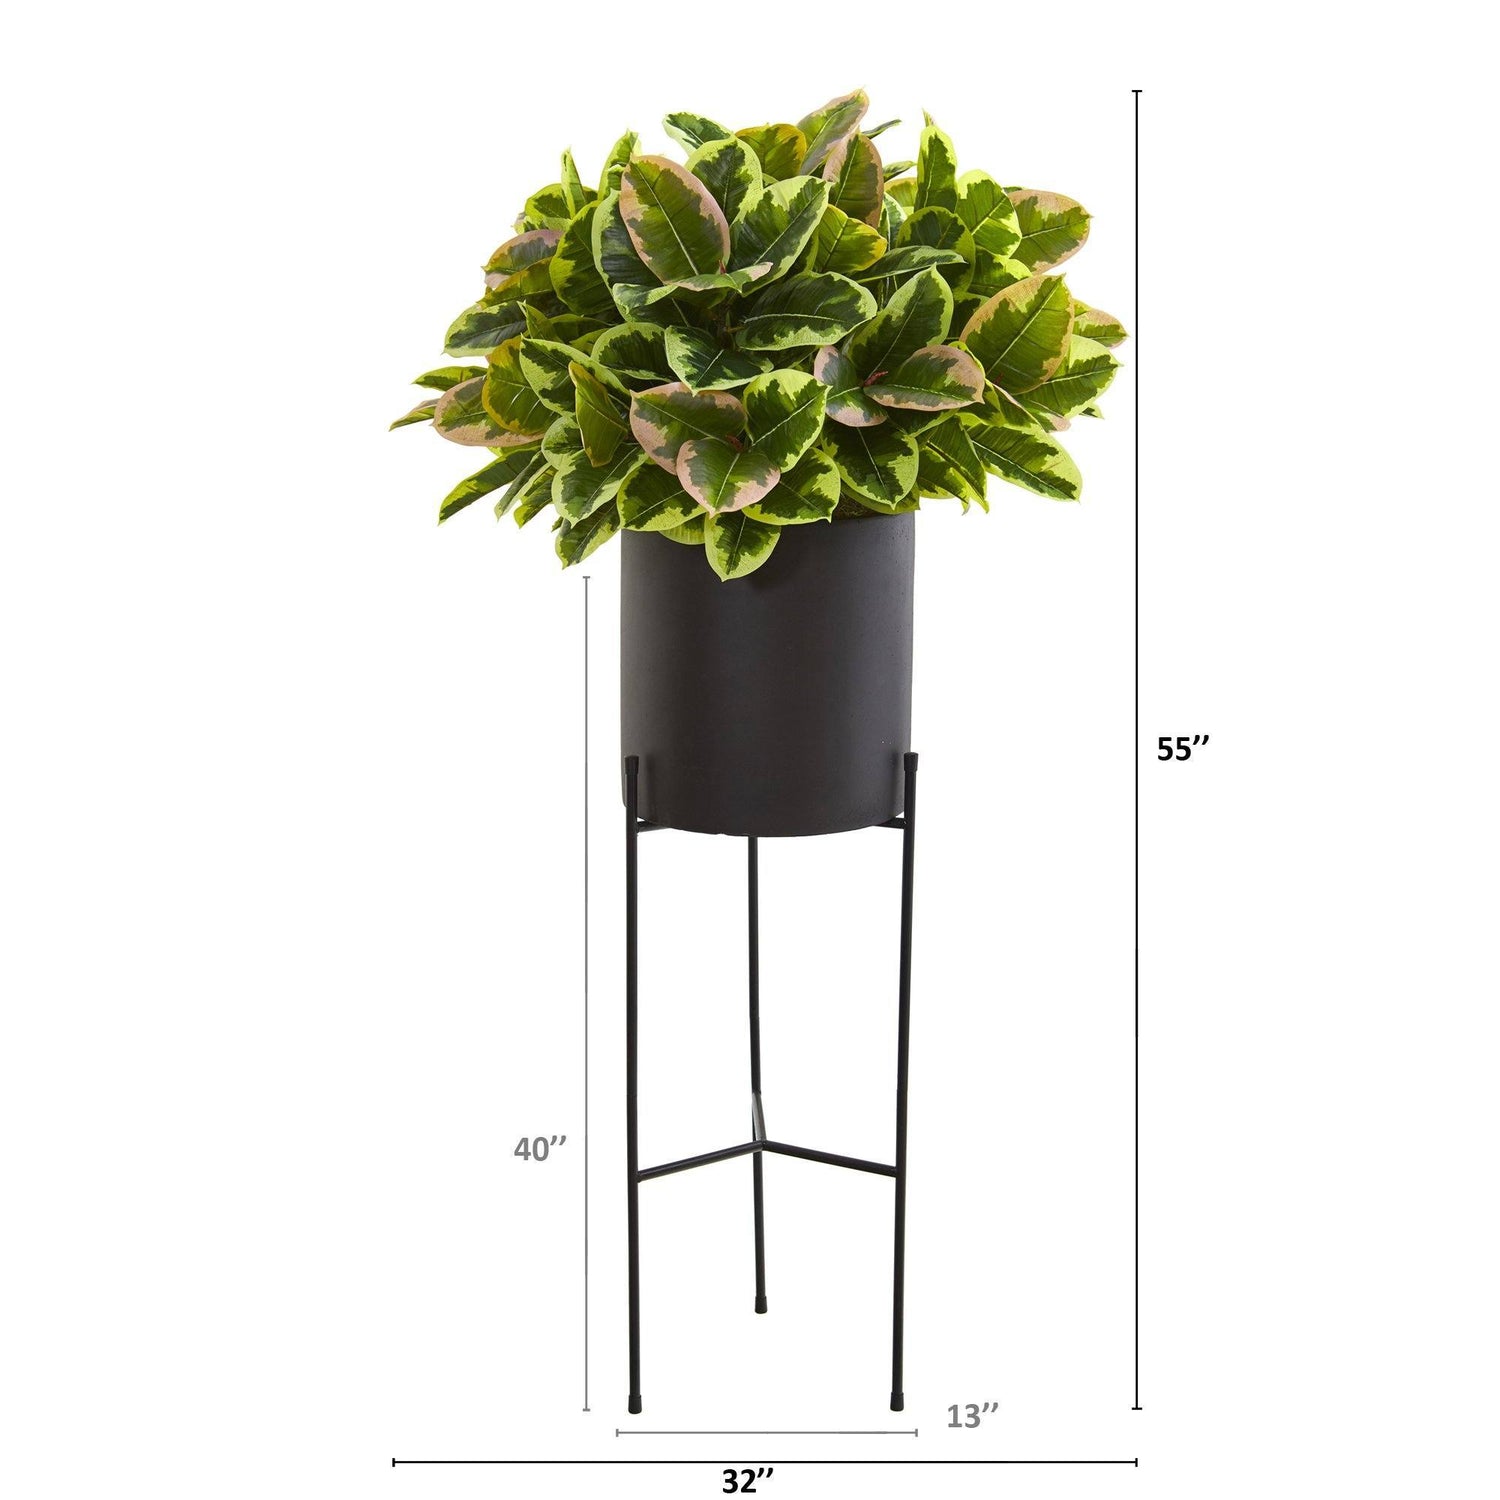 55” Rubber Leaf Artificial Plant in Black Planter with Stand (Real Touch)